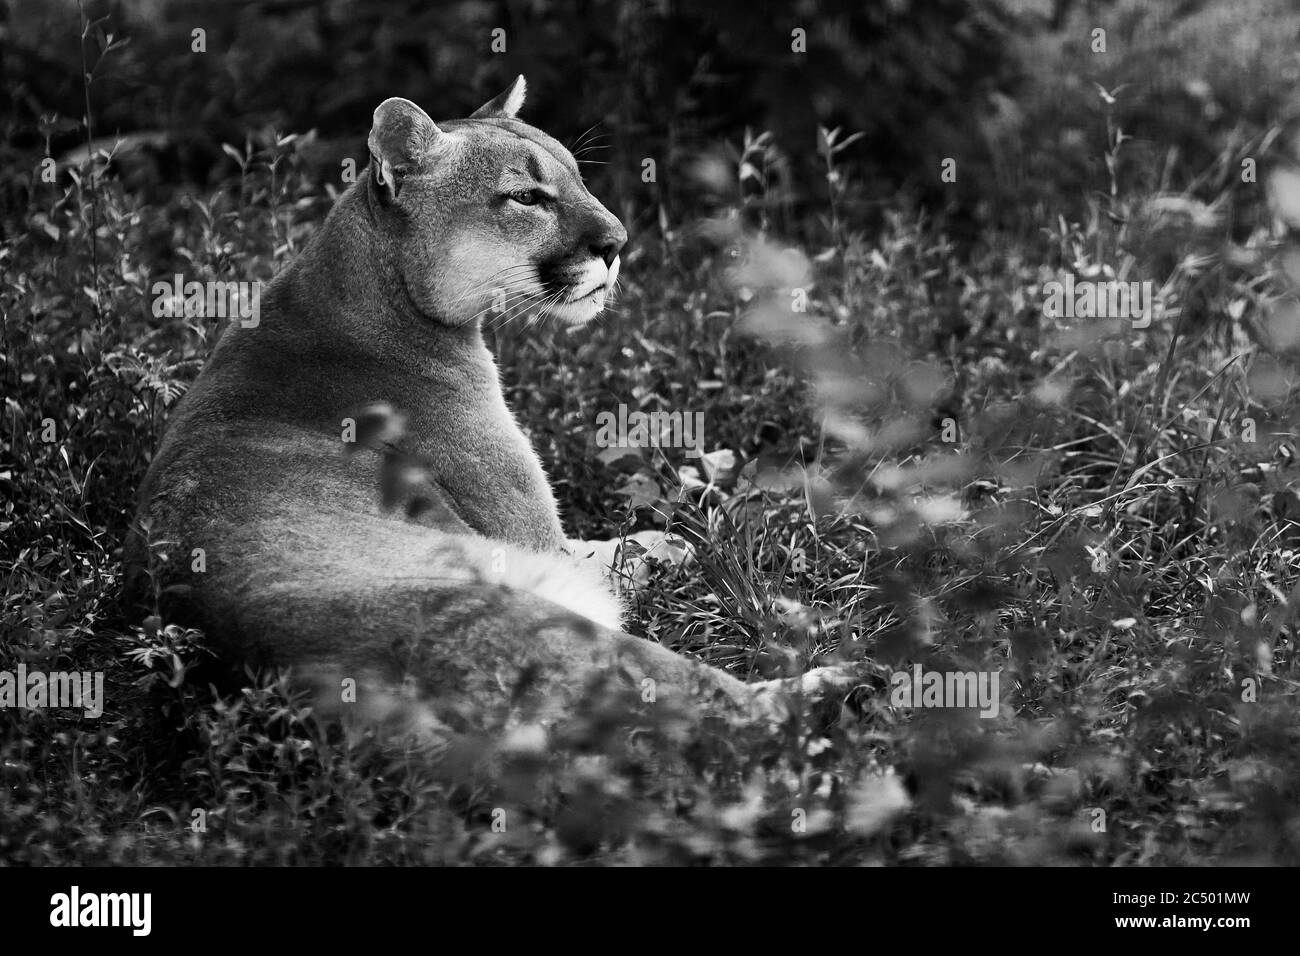 Portrait of Beautiful Puma. Cougar, mountain lion, puma, panther, striking pose, scene in the woods, wildlife America. Stock Photo